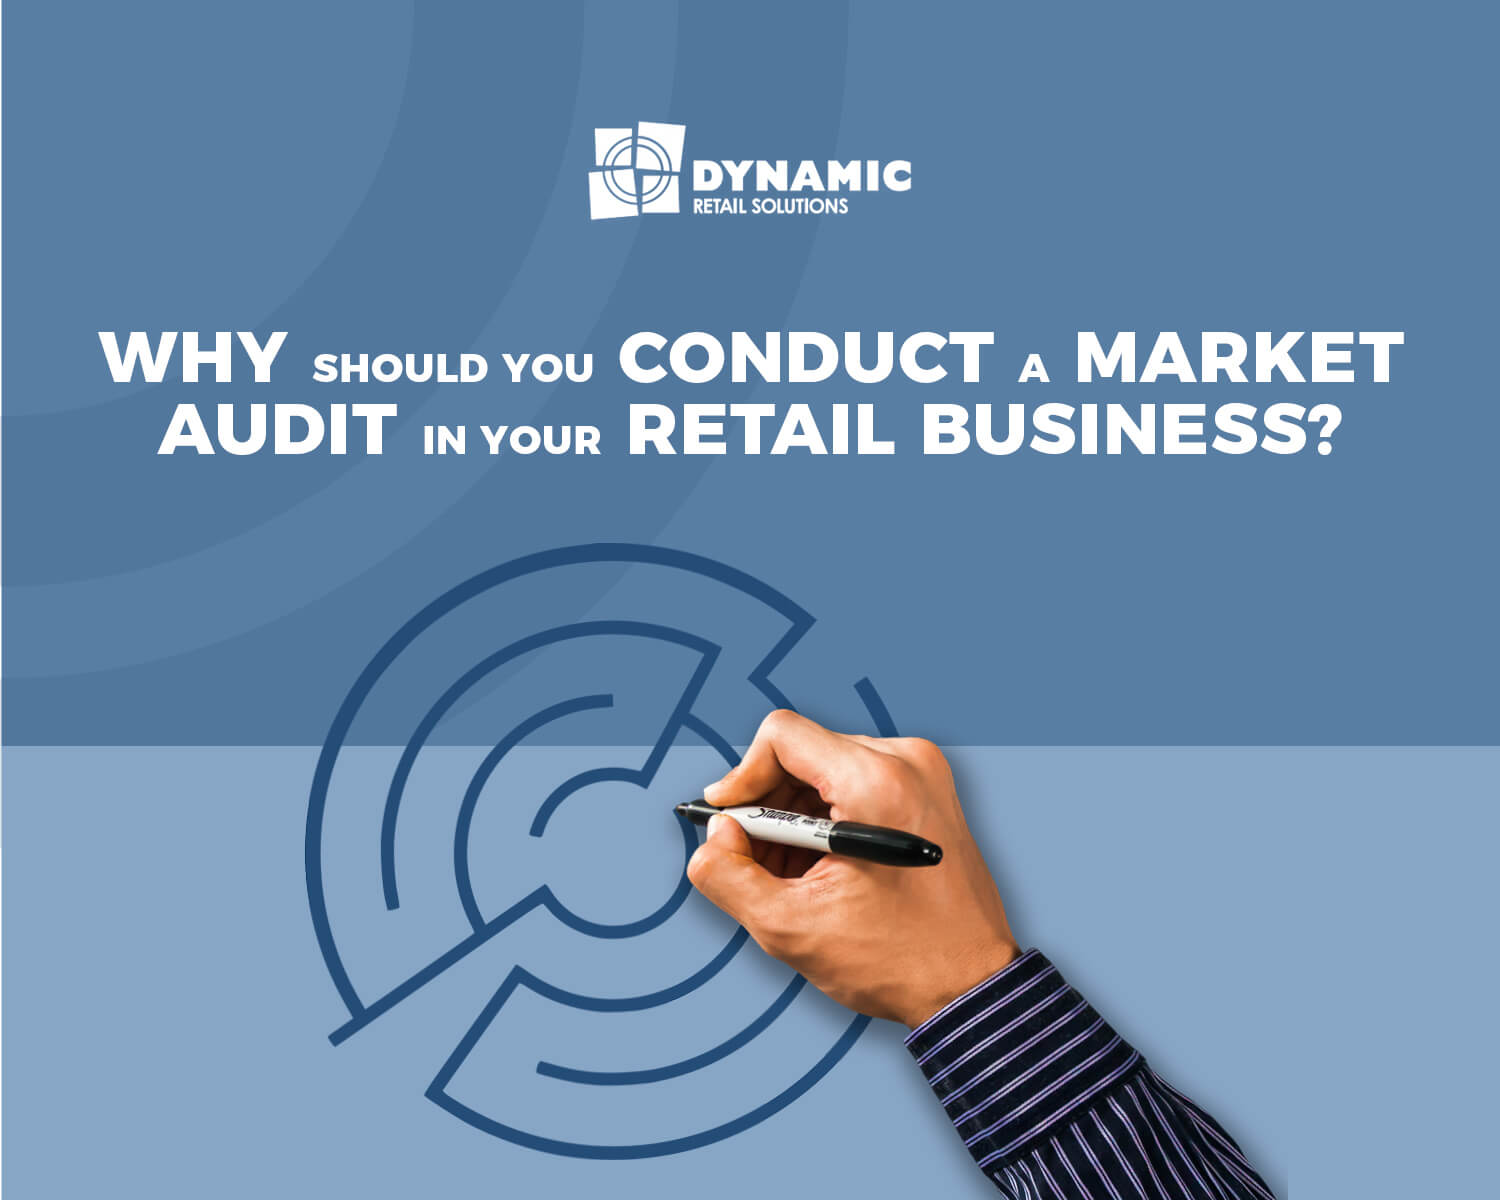 Why Should You Conduct a Market Audit in Your Retail Business?